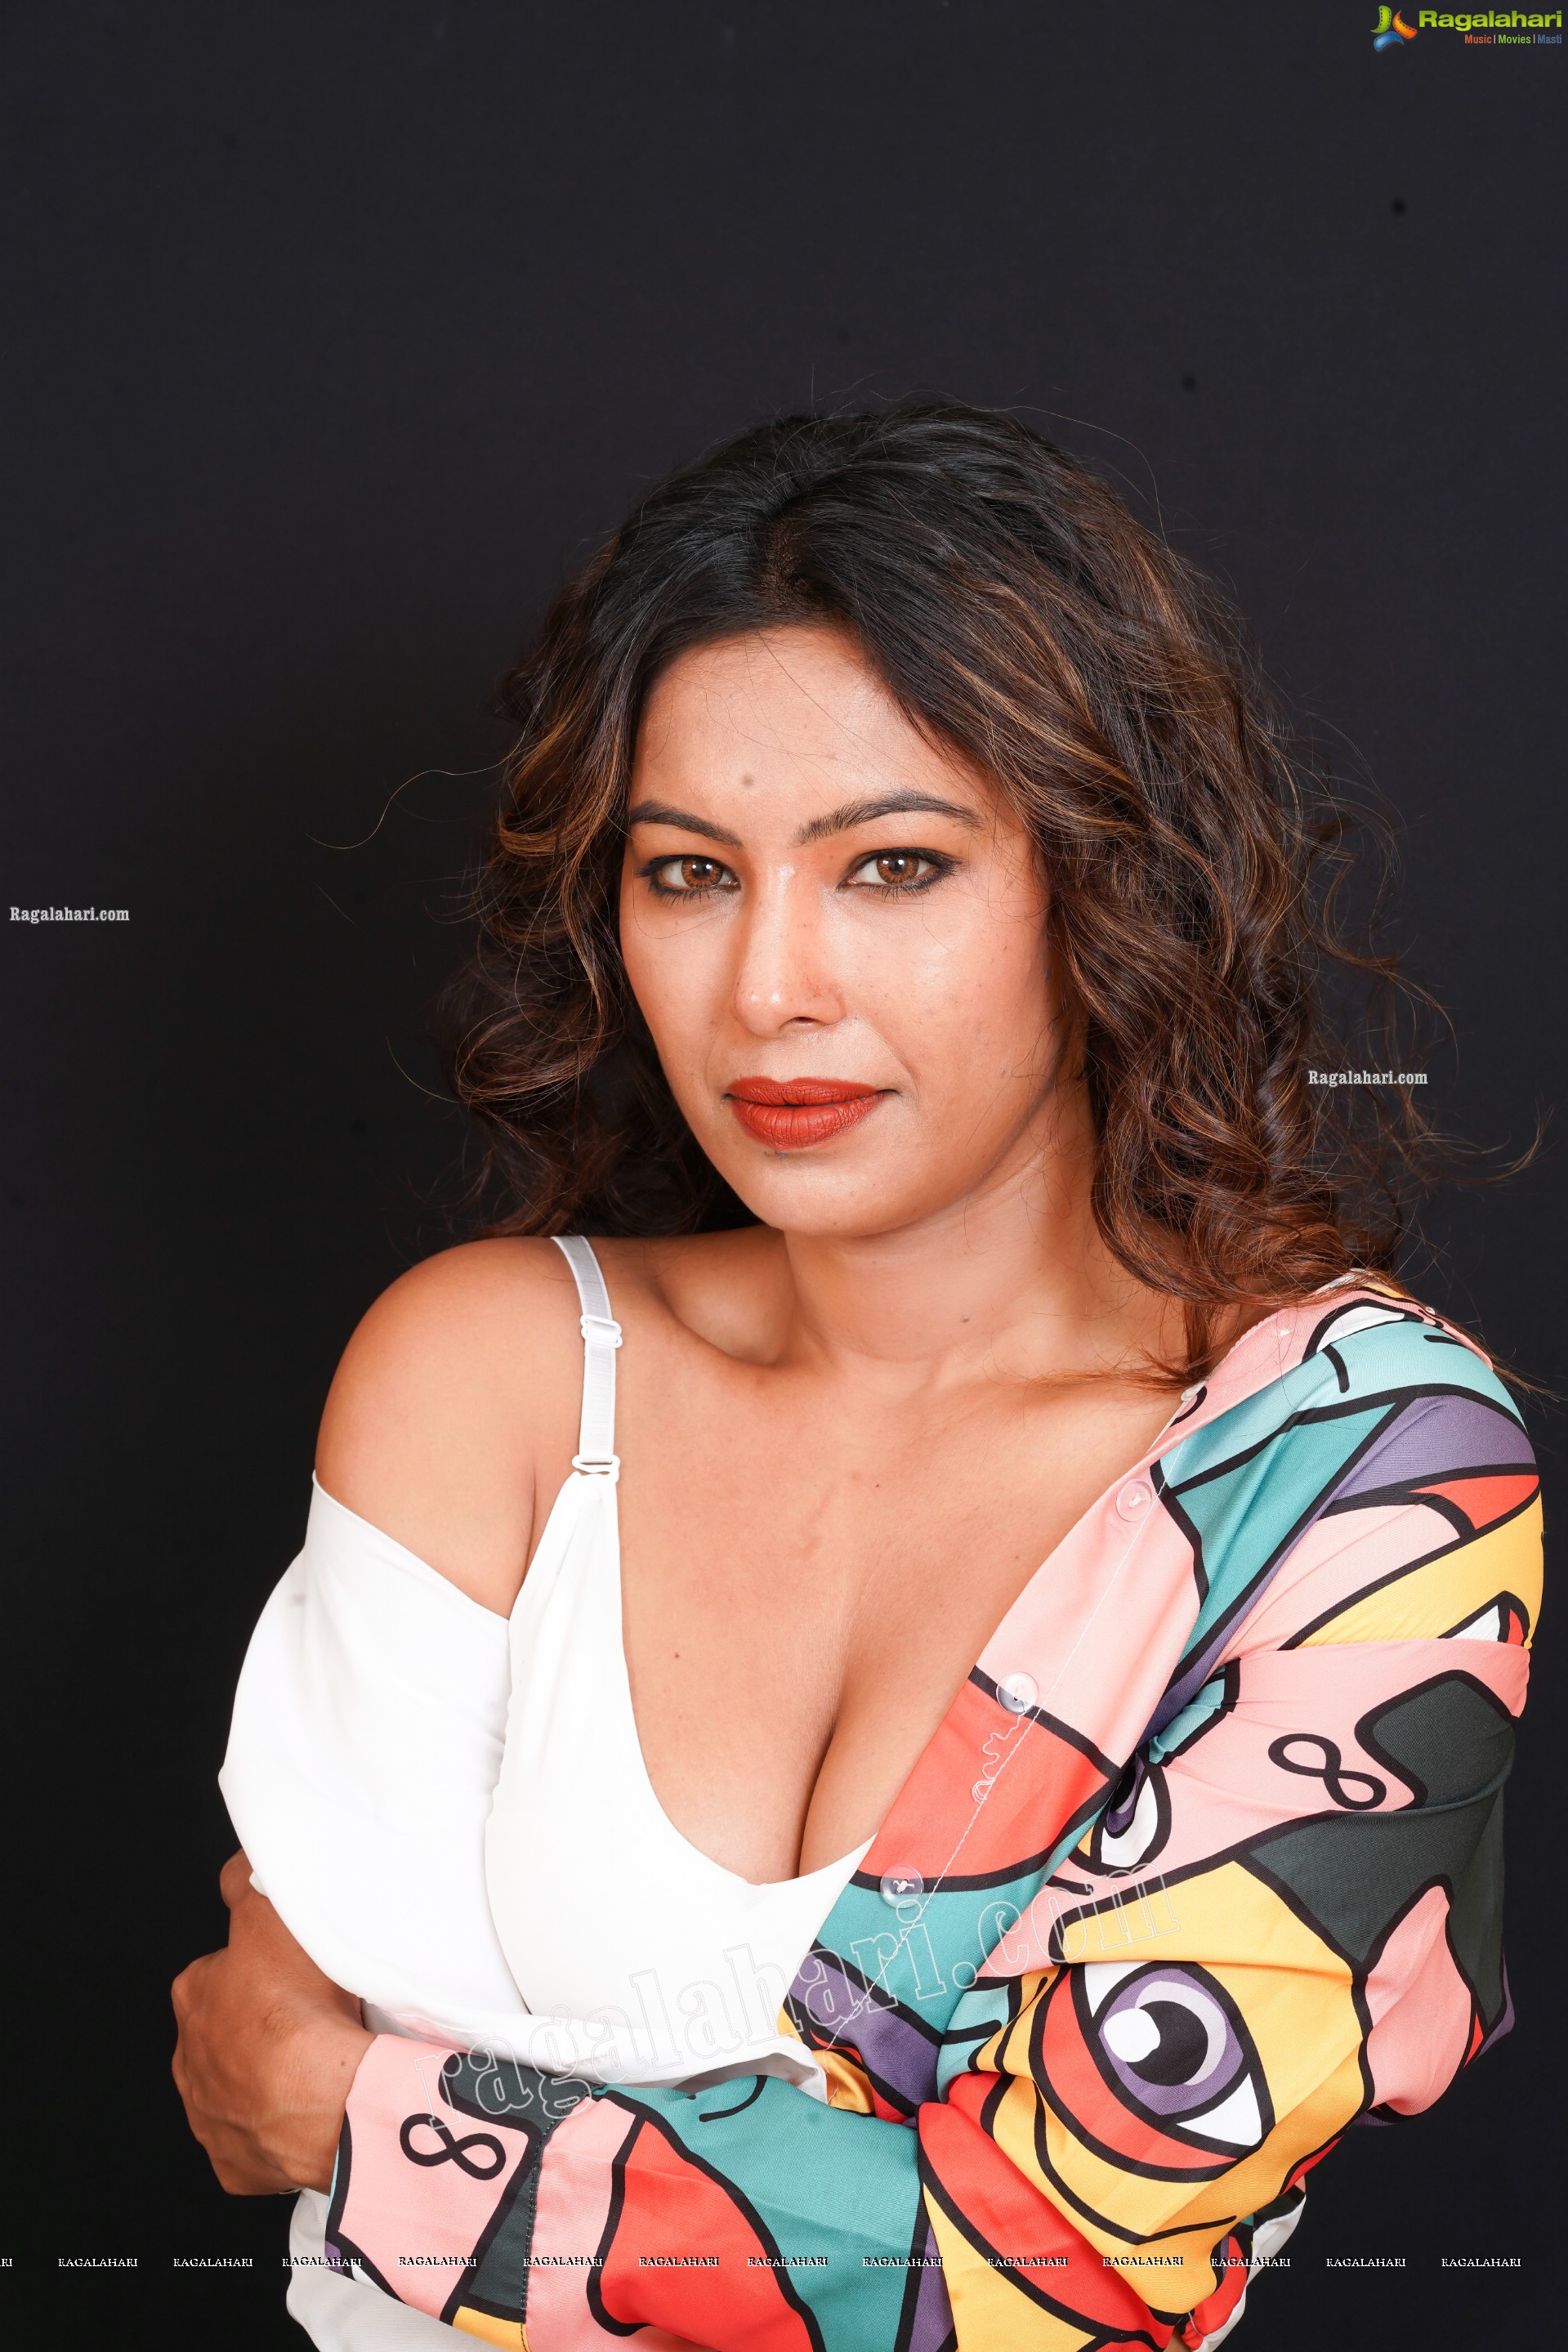 Ankita Bhattacharya in White Printed Crop Top and Black Pant, Exclusive Photoshoot